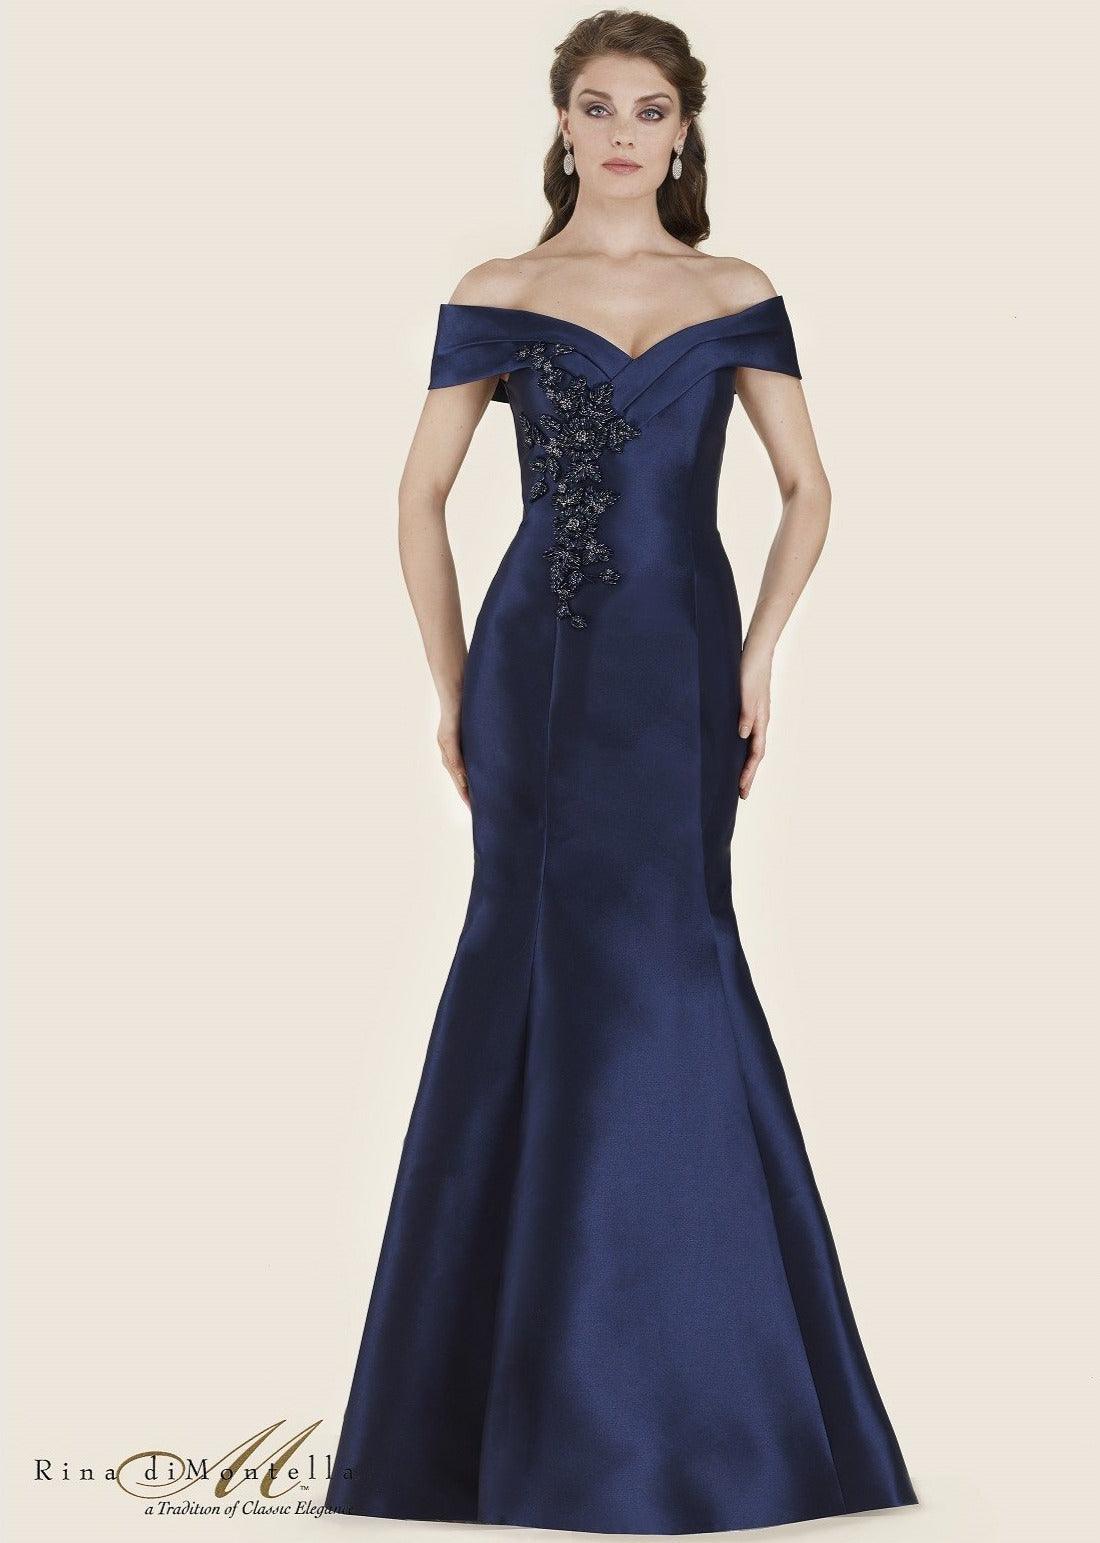 Rina di Montella Long Formal Off Shoulder Gown 2602 - The Dress Outlet